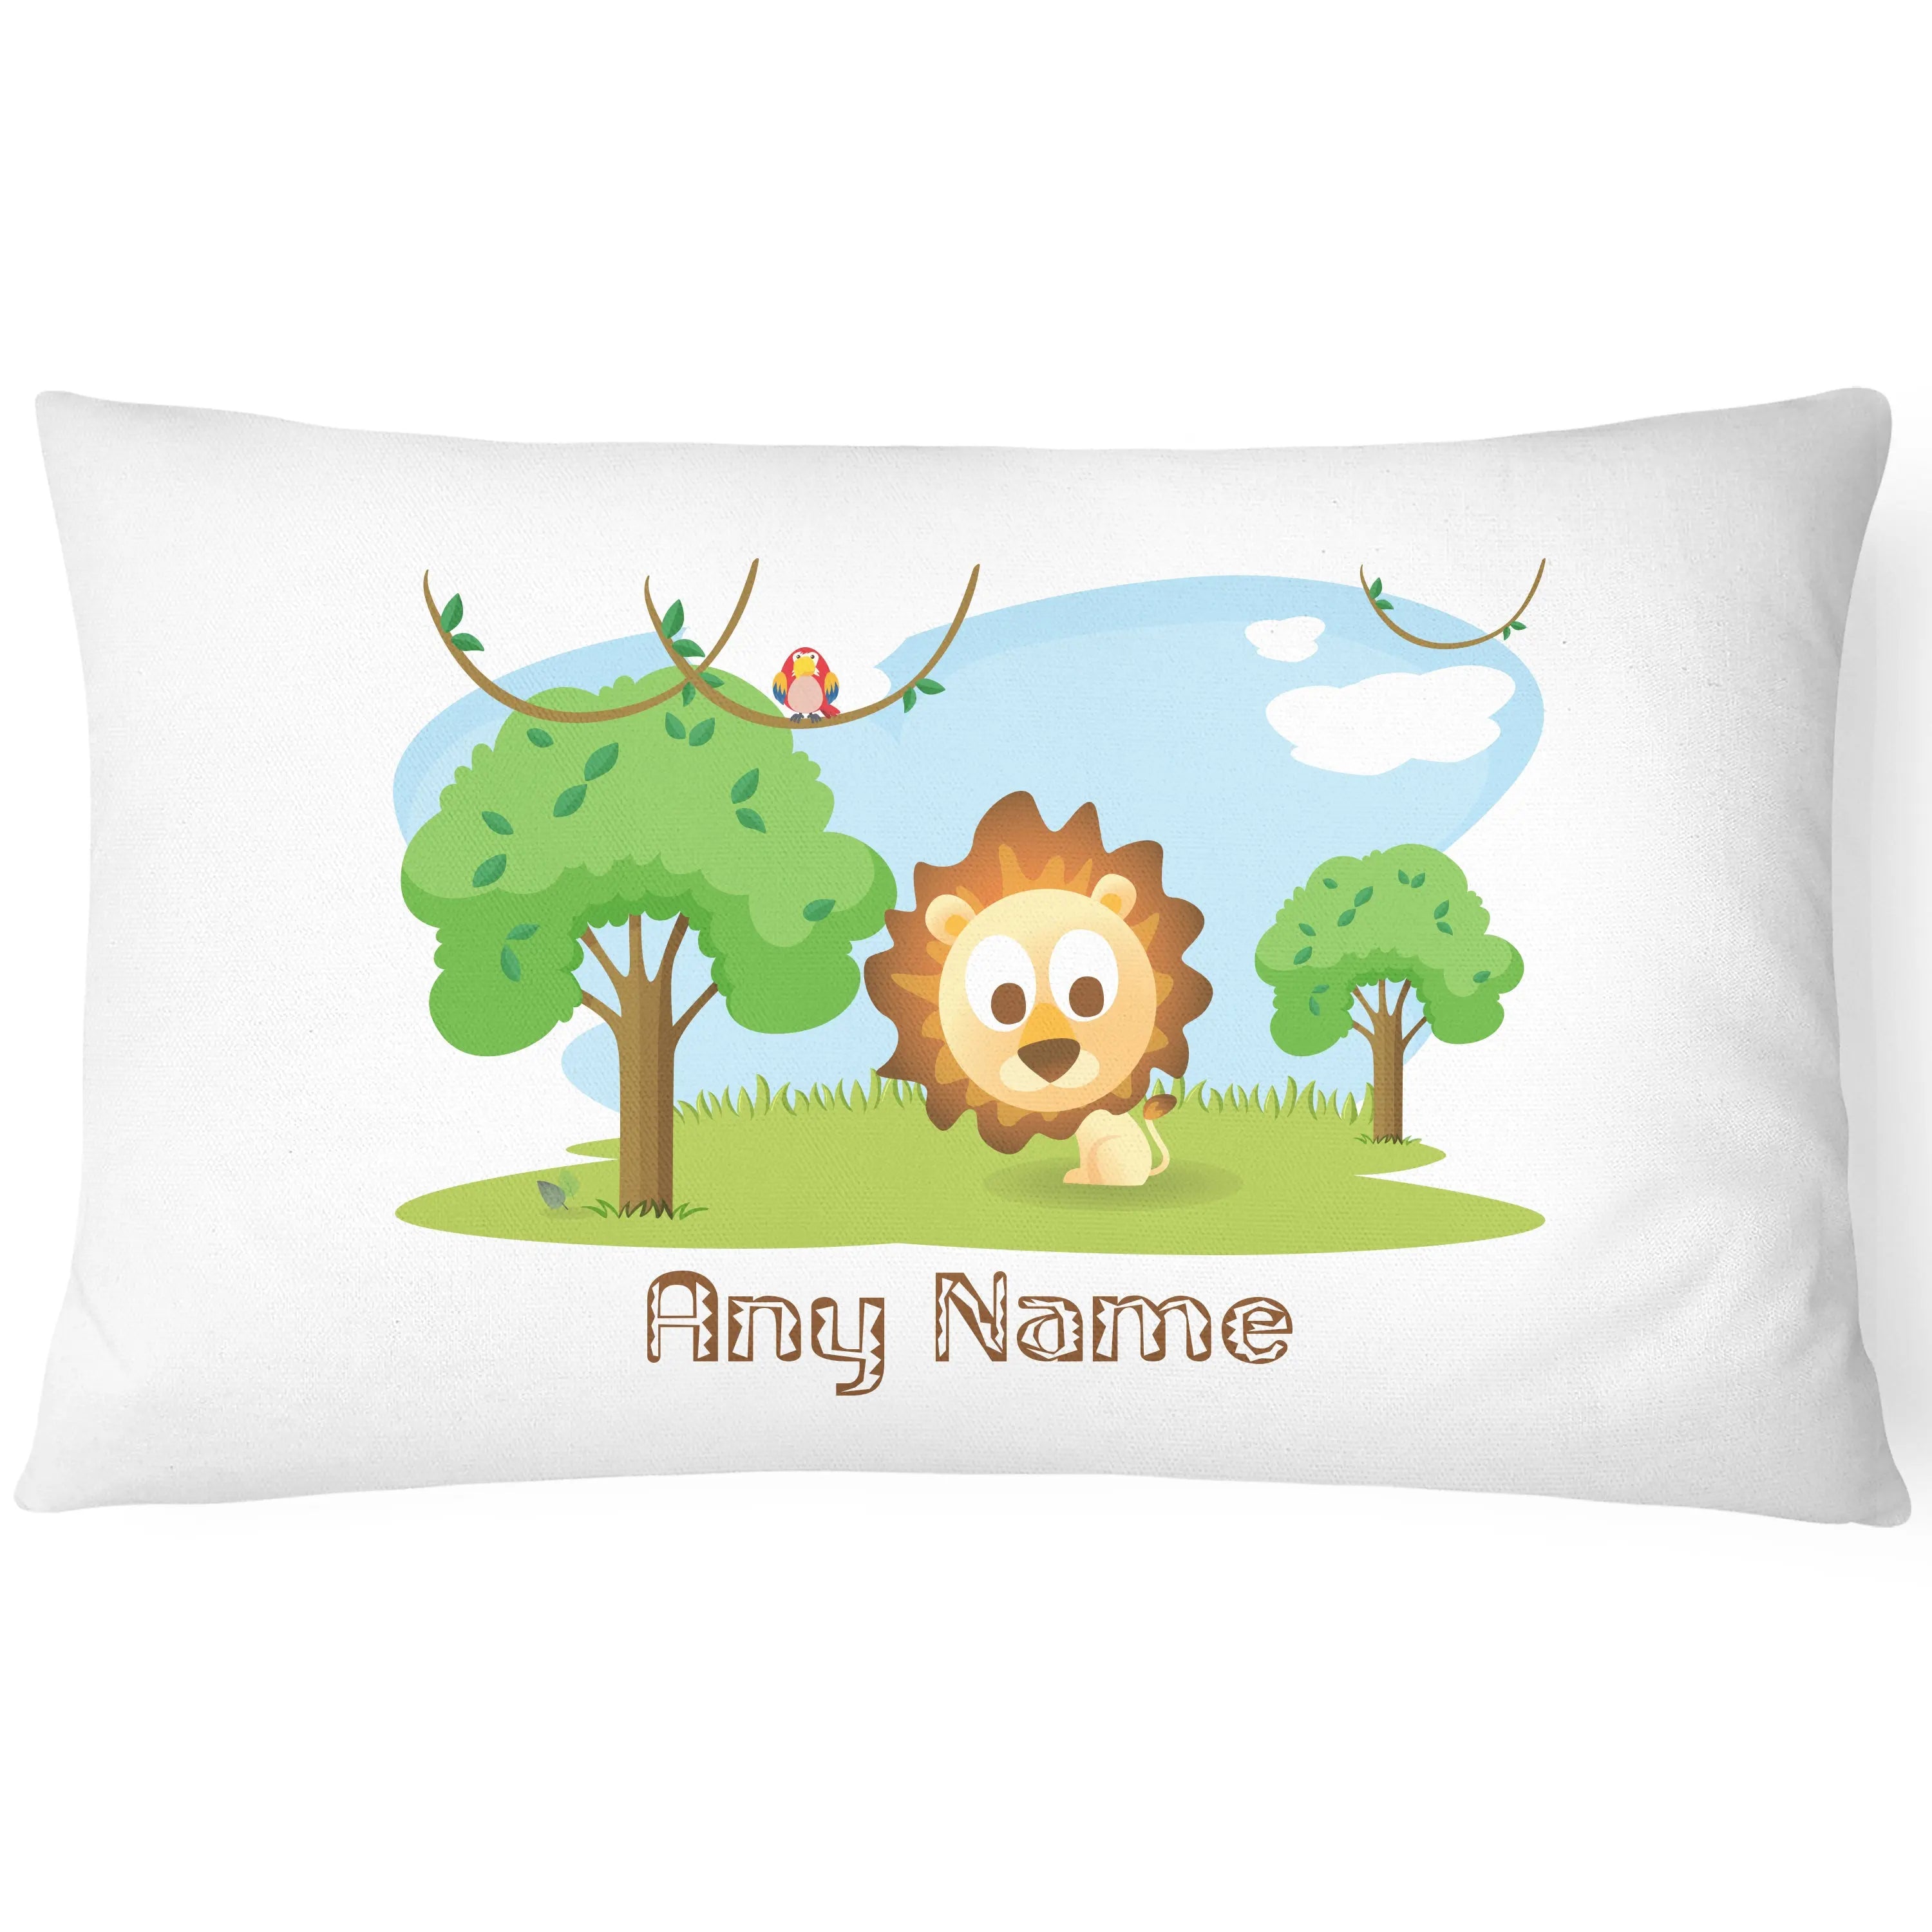 Cute Animal Zoo - Children's Pillowcase - Personalise with Any Name - Lion - CushionPop